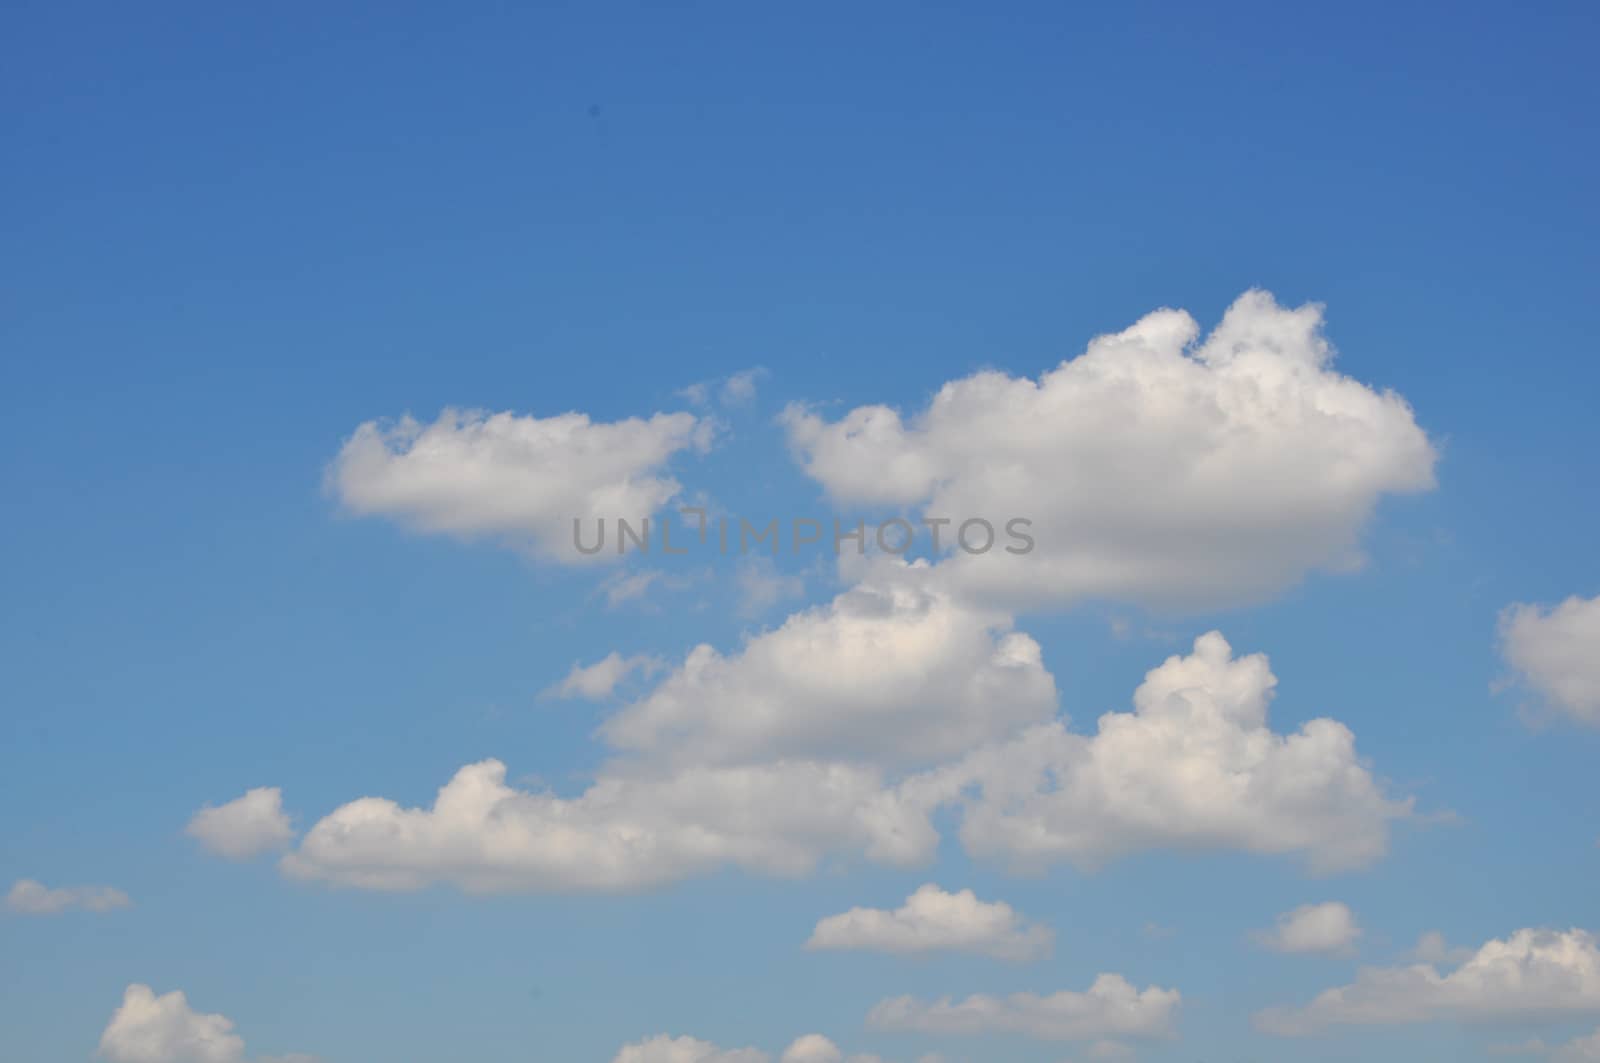 Blue sky with some white b puffy clouds







&lt;font&gt; &lt;font&gt; Нажмите, чтобы изменить &lt;/ FONT&gt; &lt;/ FONT&gt;</font></font>